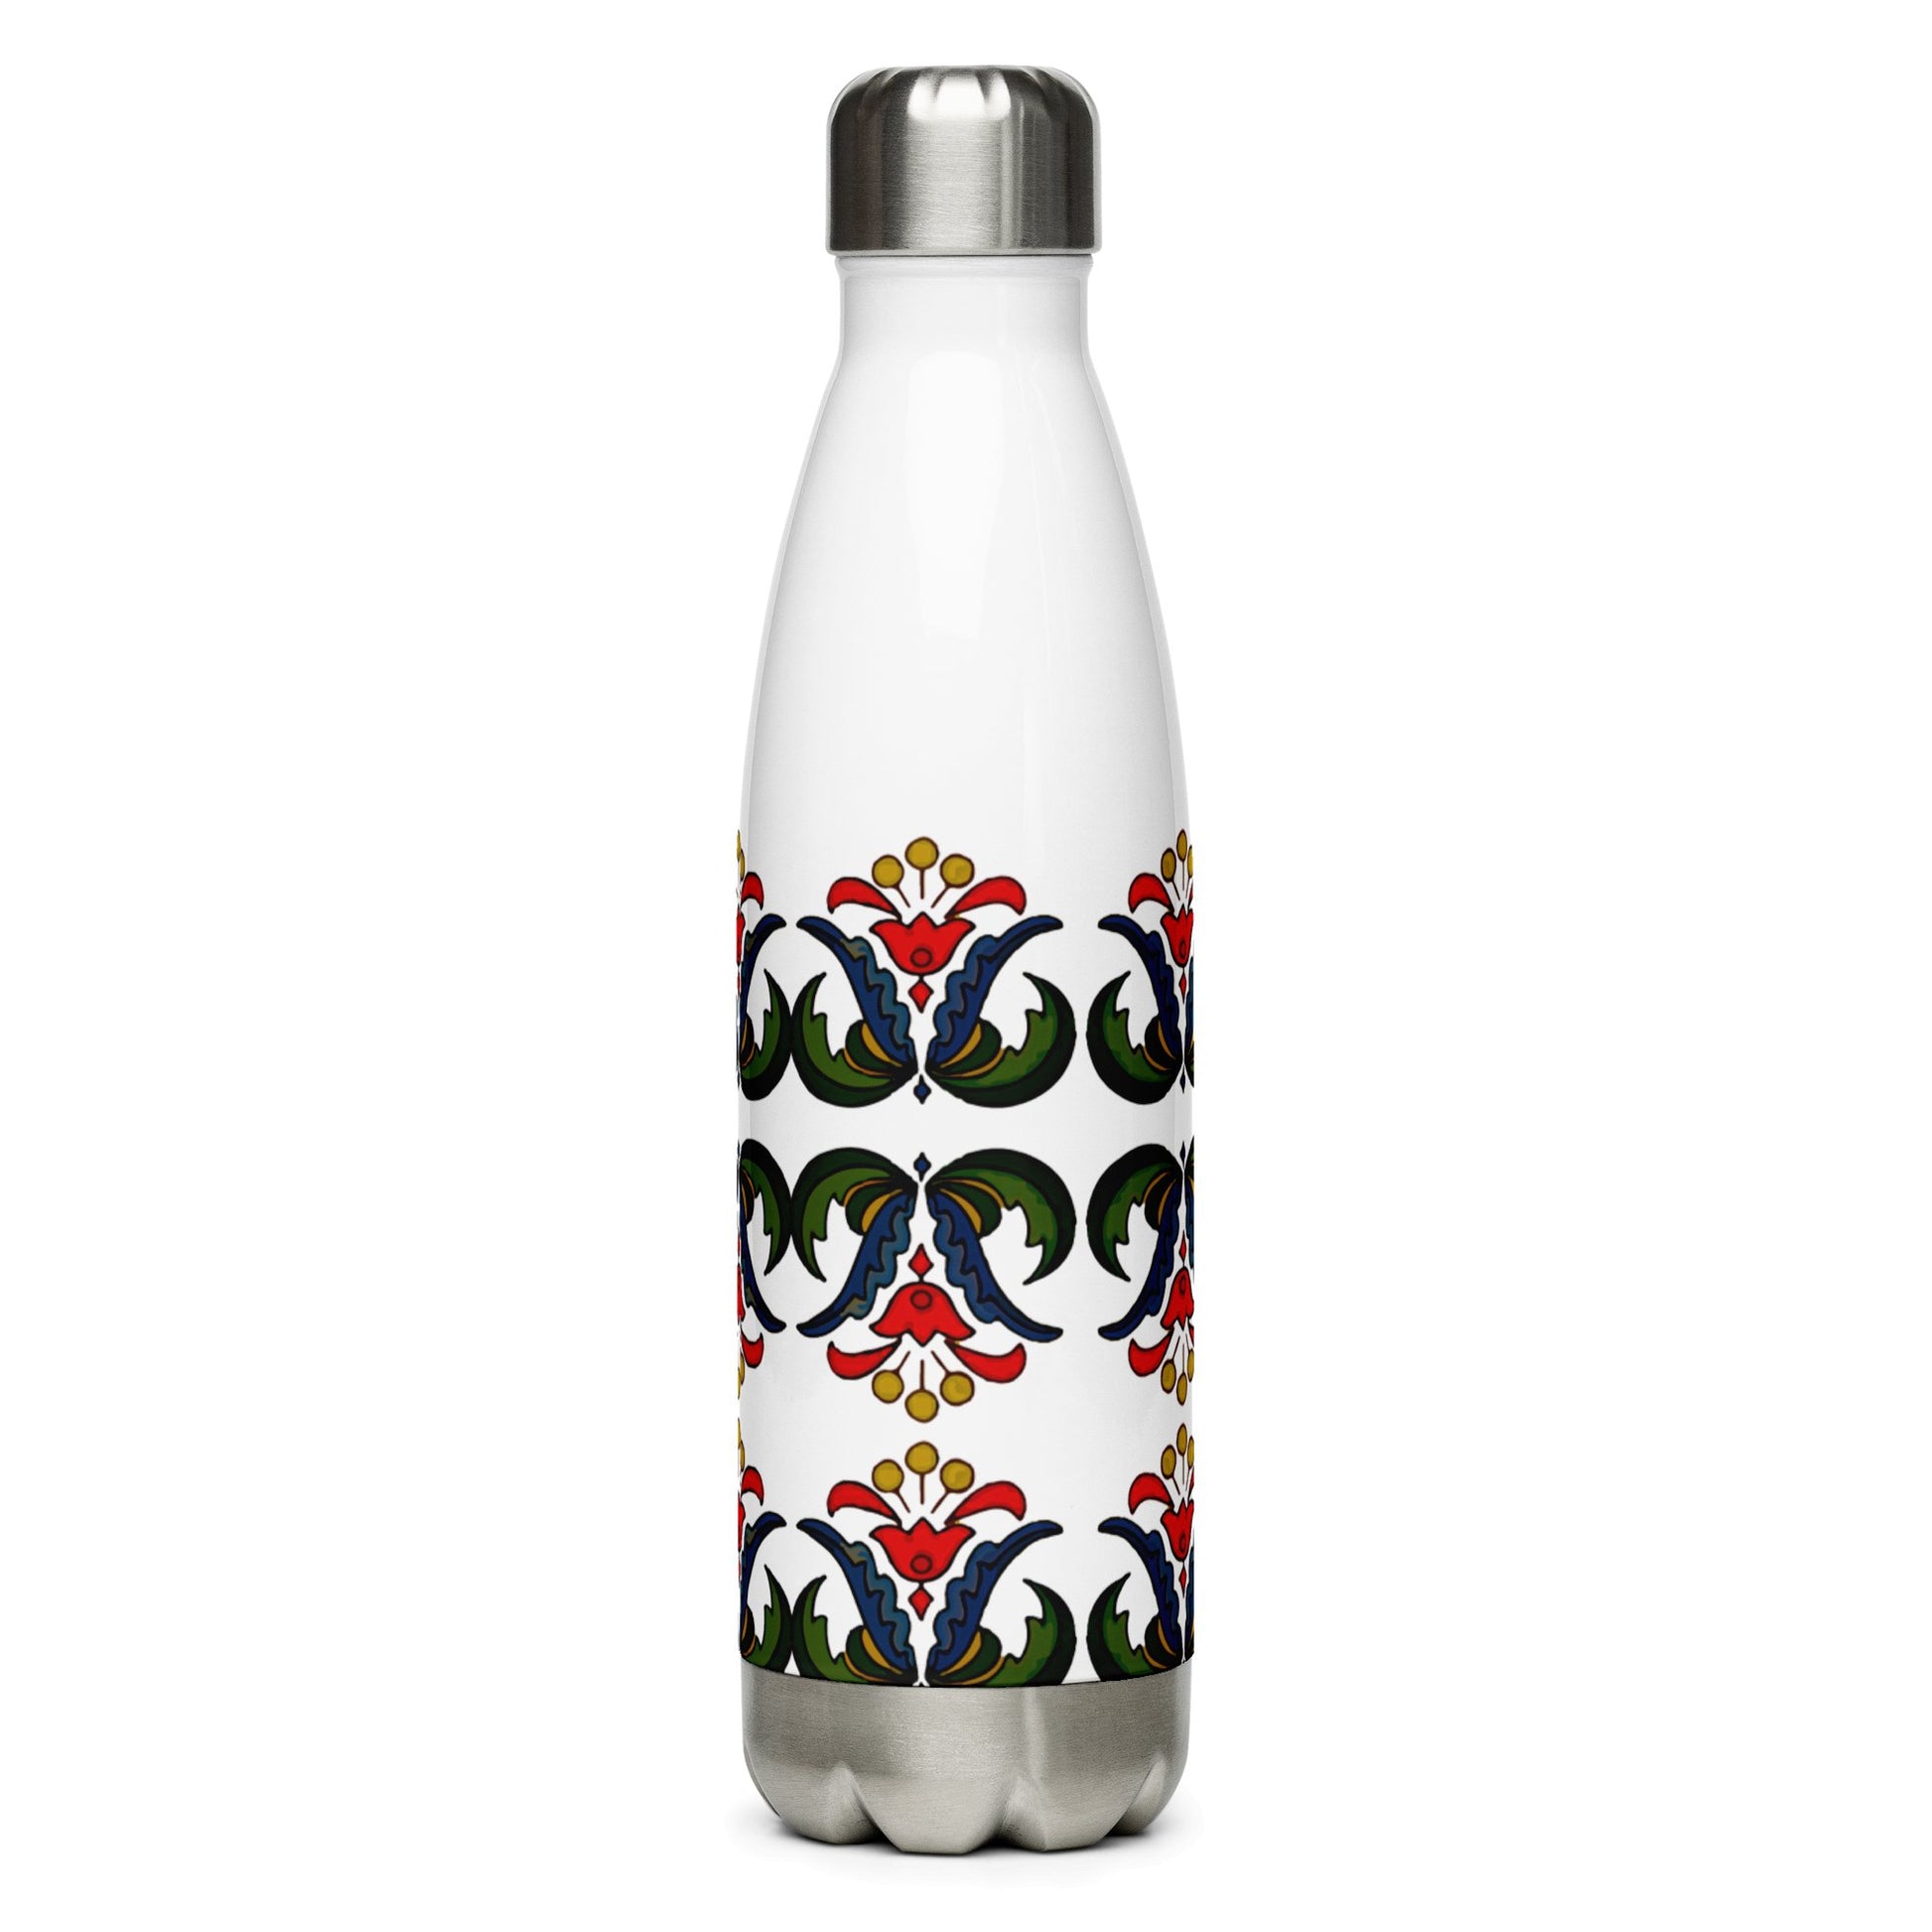 Szur Embroidery Design All Gender Stainless Steel Water Bottle - Fire - Red Rosehip Studio